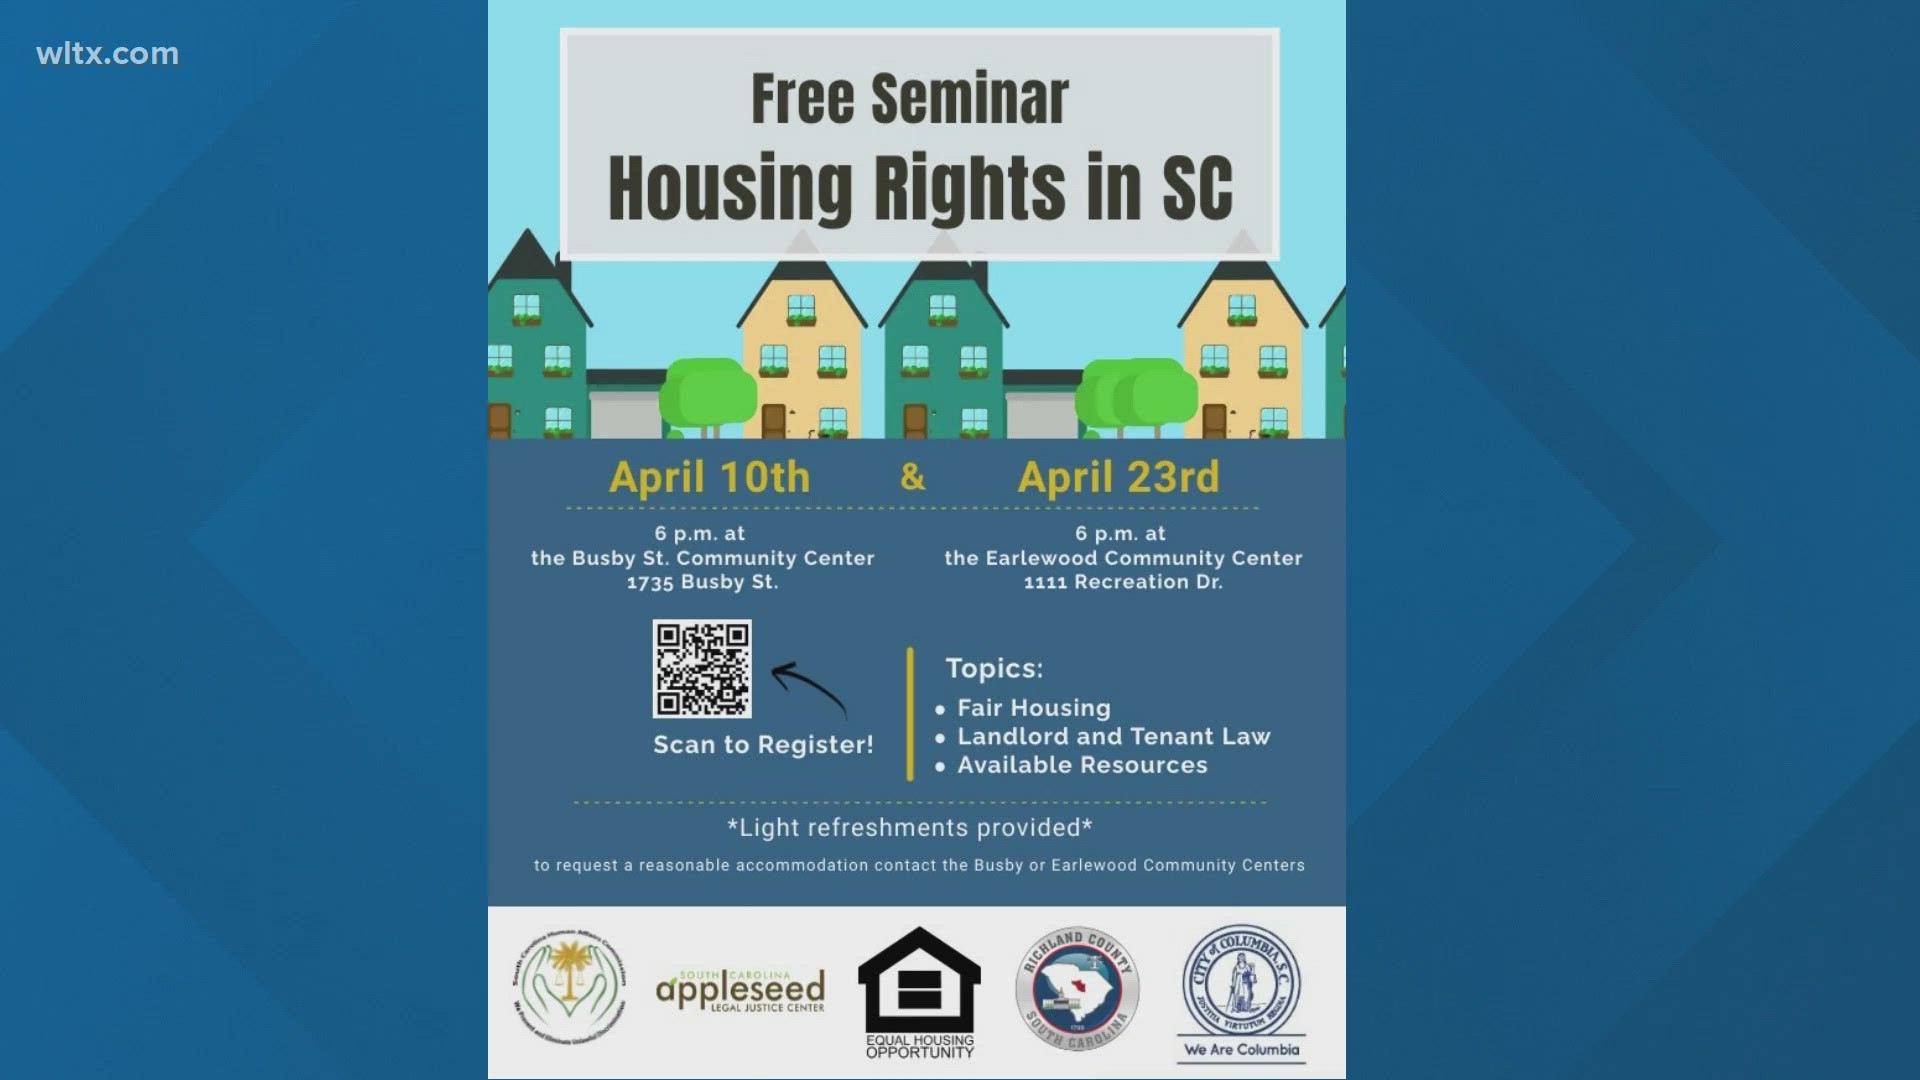 The event will tackle fair housing practices, landlord and tenant law, and various other resources.